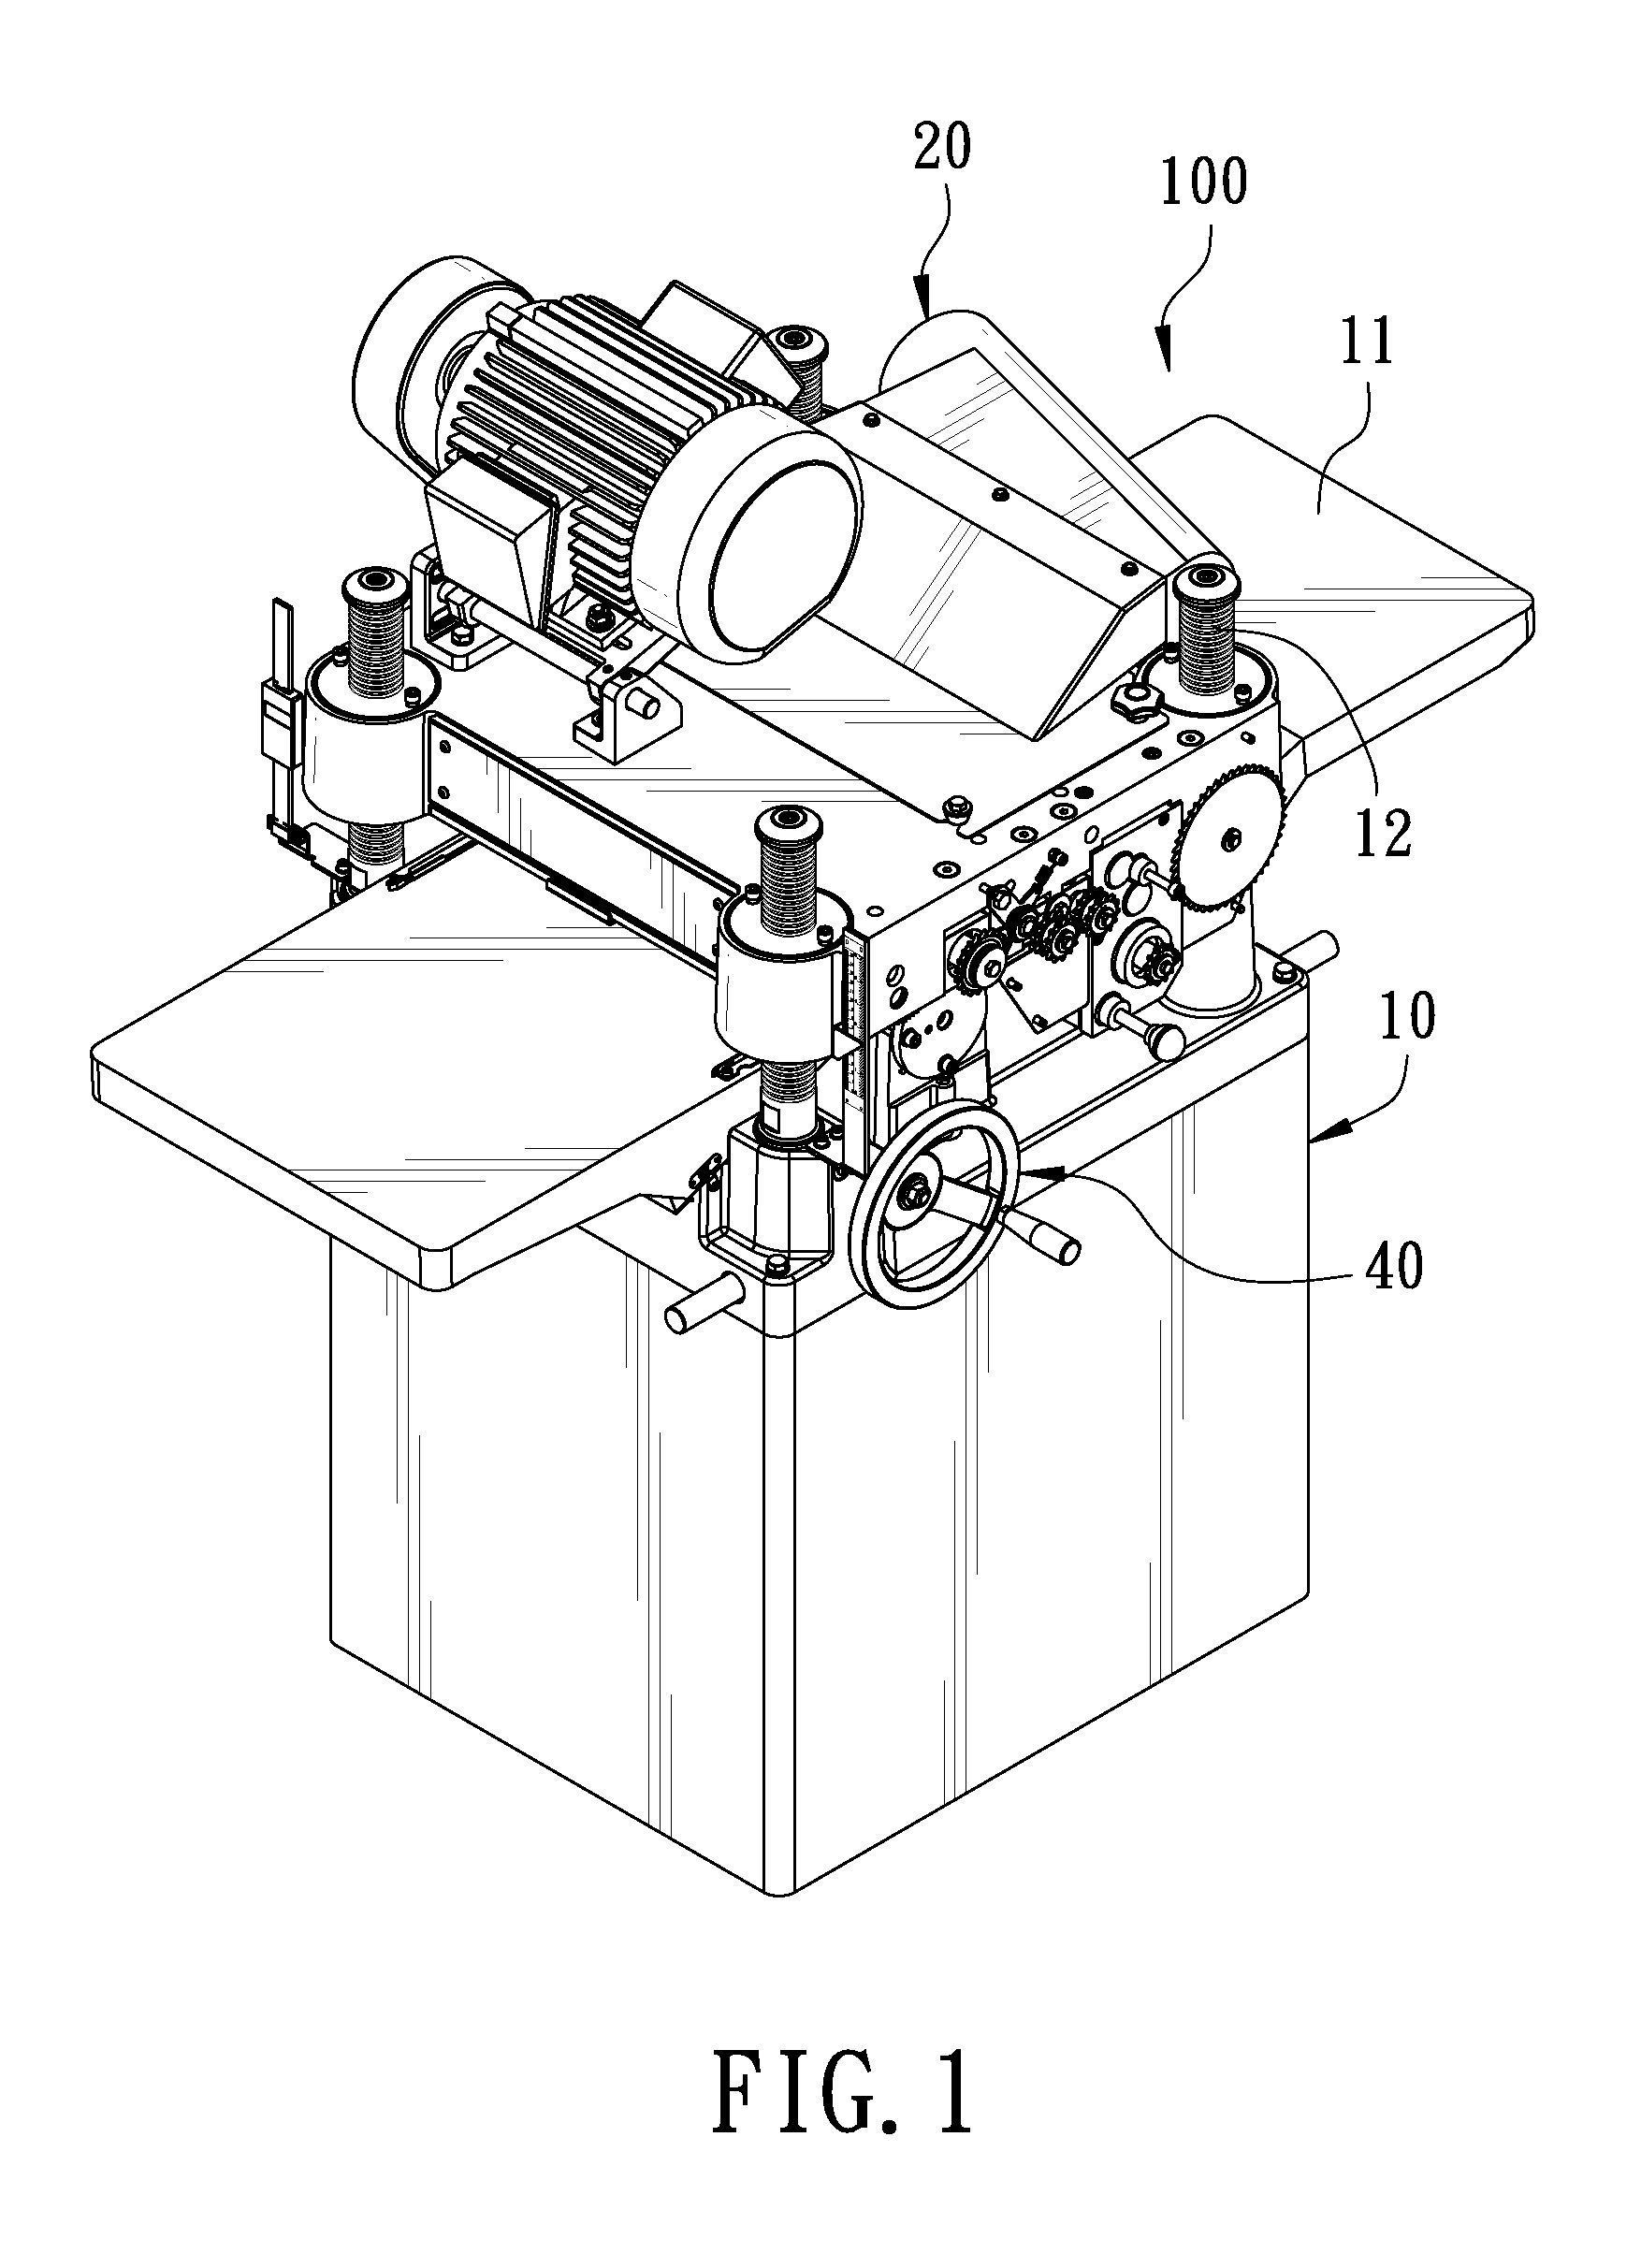 Two-sided planer